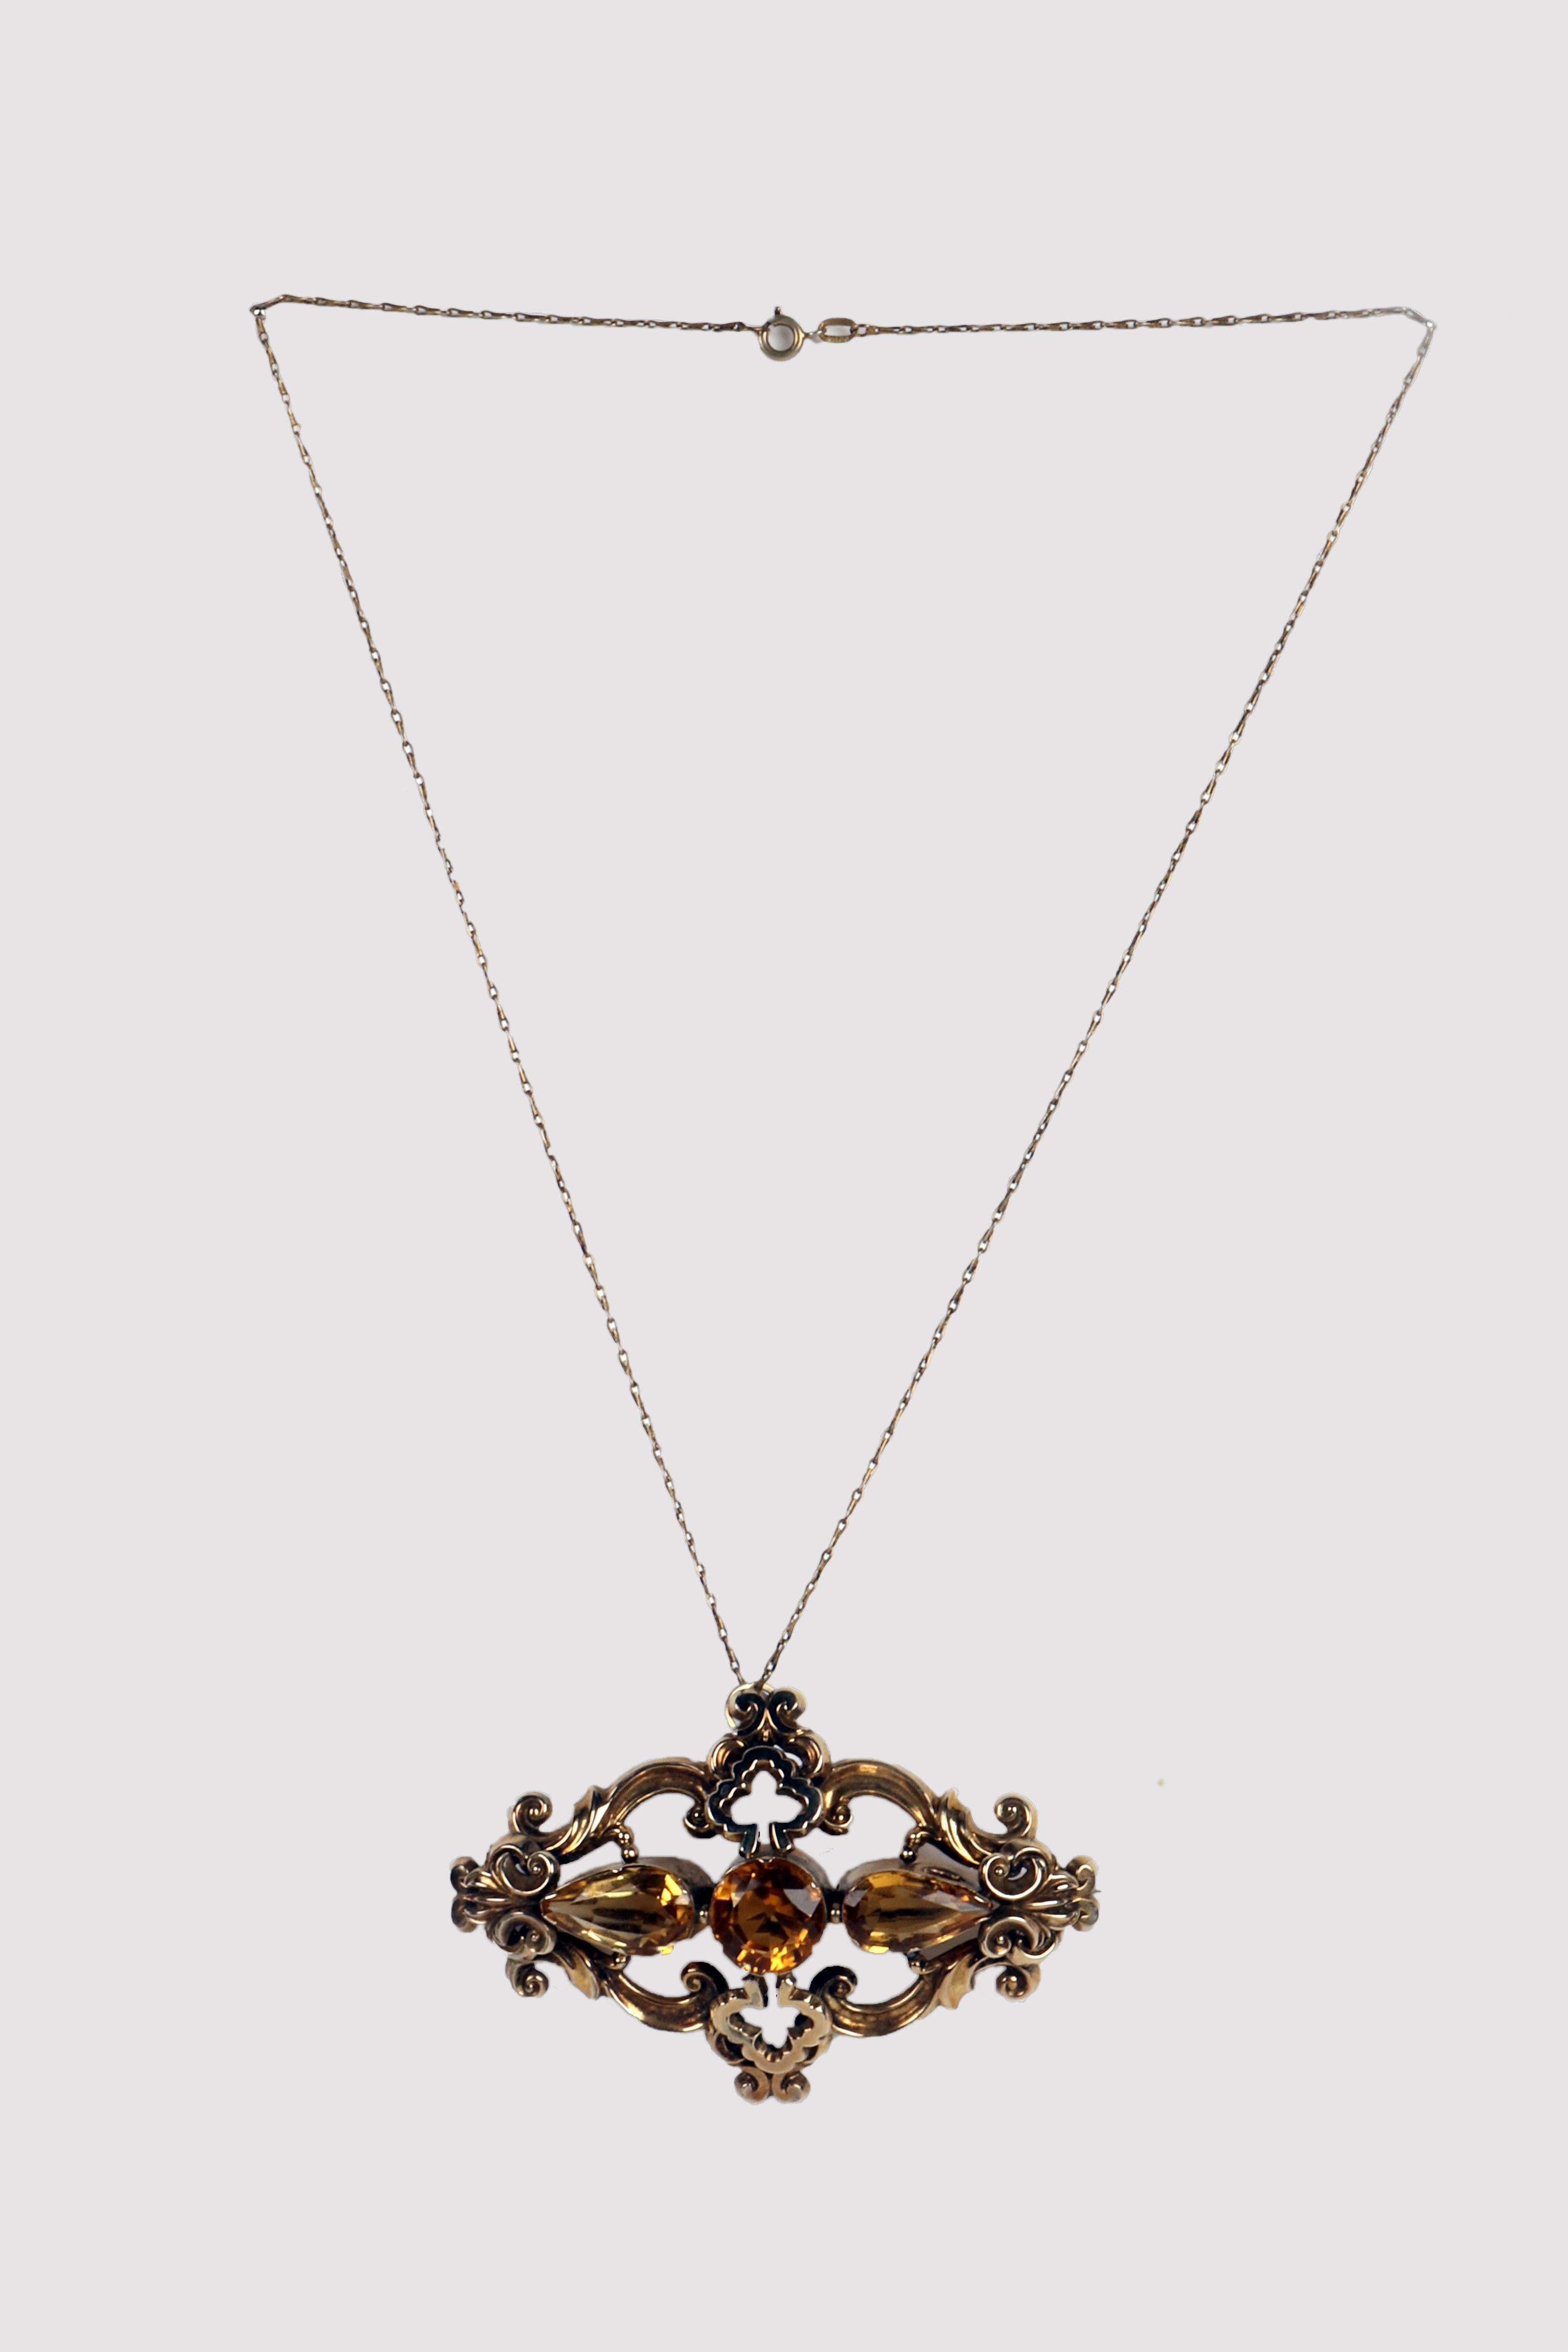 A thin gold necklace with elongated links and a circular lobster clasp holds a pendant brooch with a central body and oblong sides. Made of 14 Kt gold with box-shaped foil, it presents the joining elements of the frame designed with curvilinear